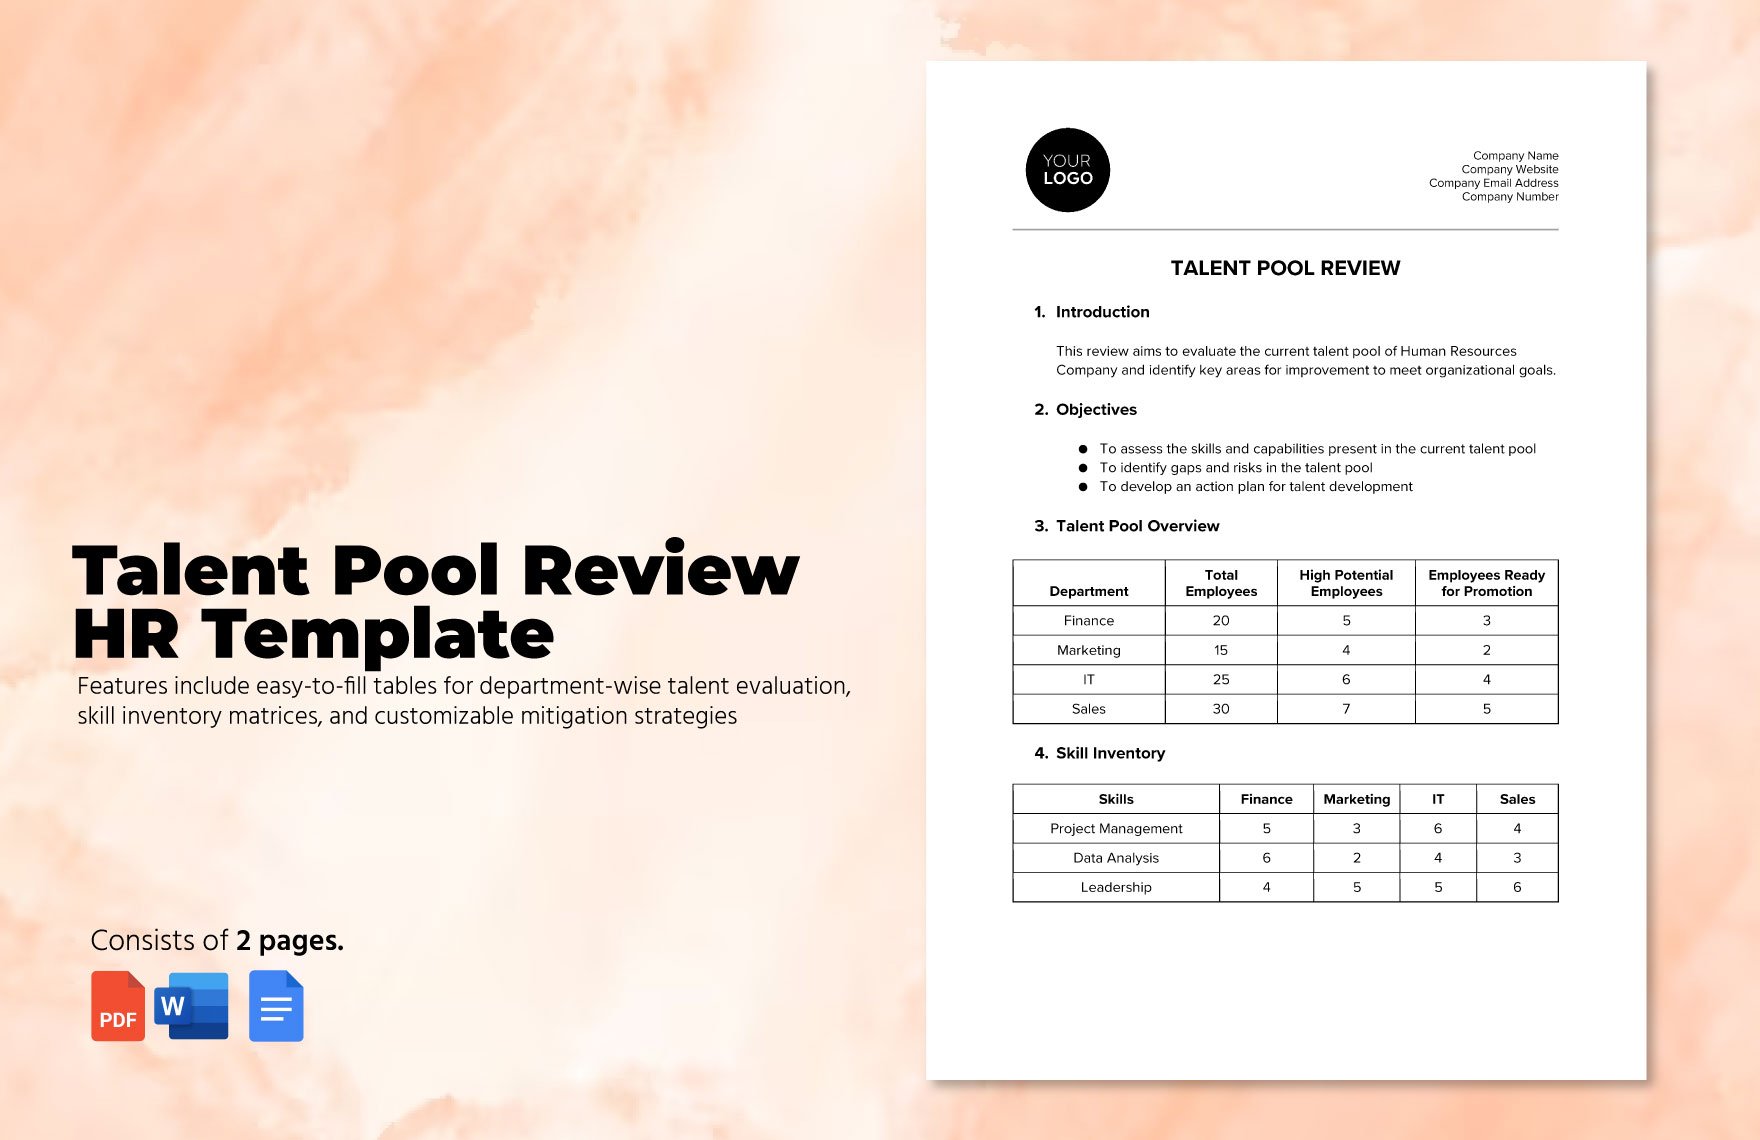 Talent Pool Review HR Template in Word, Google Docs, PDF